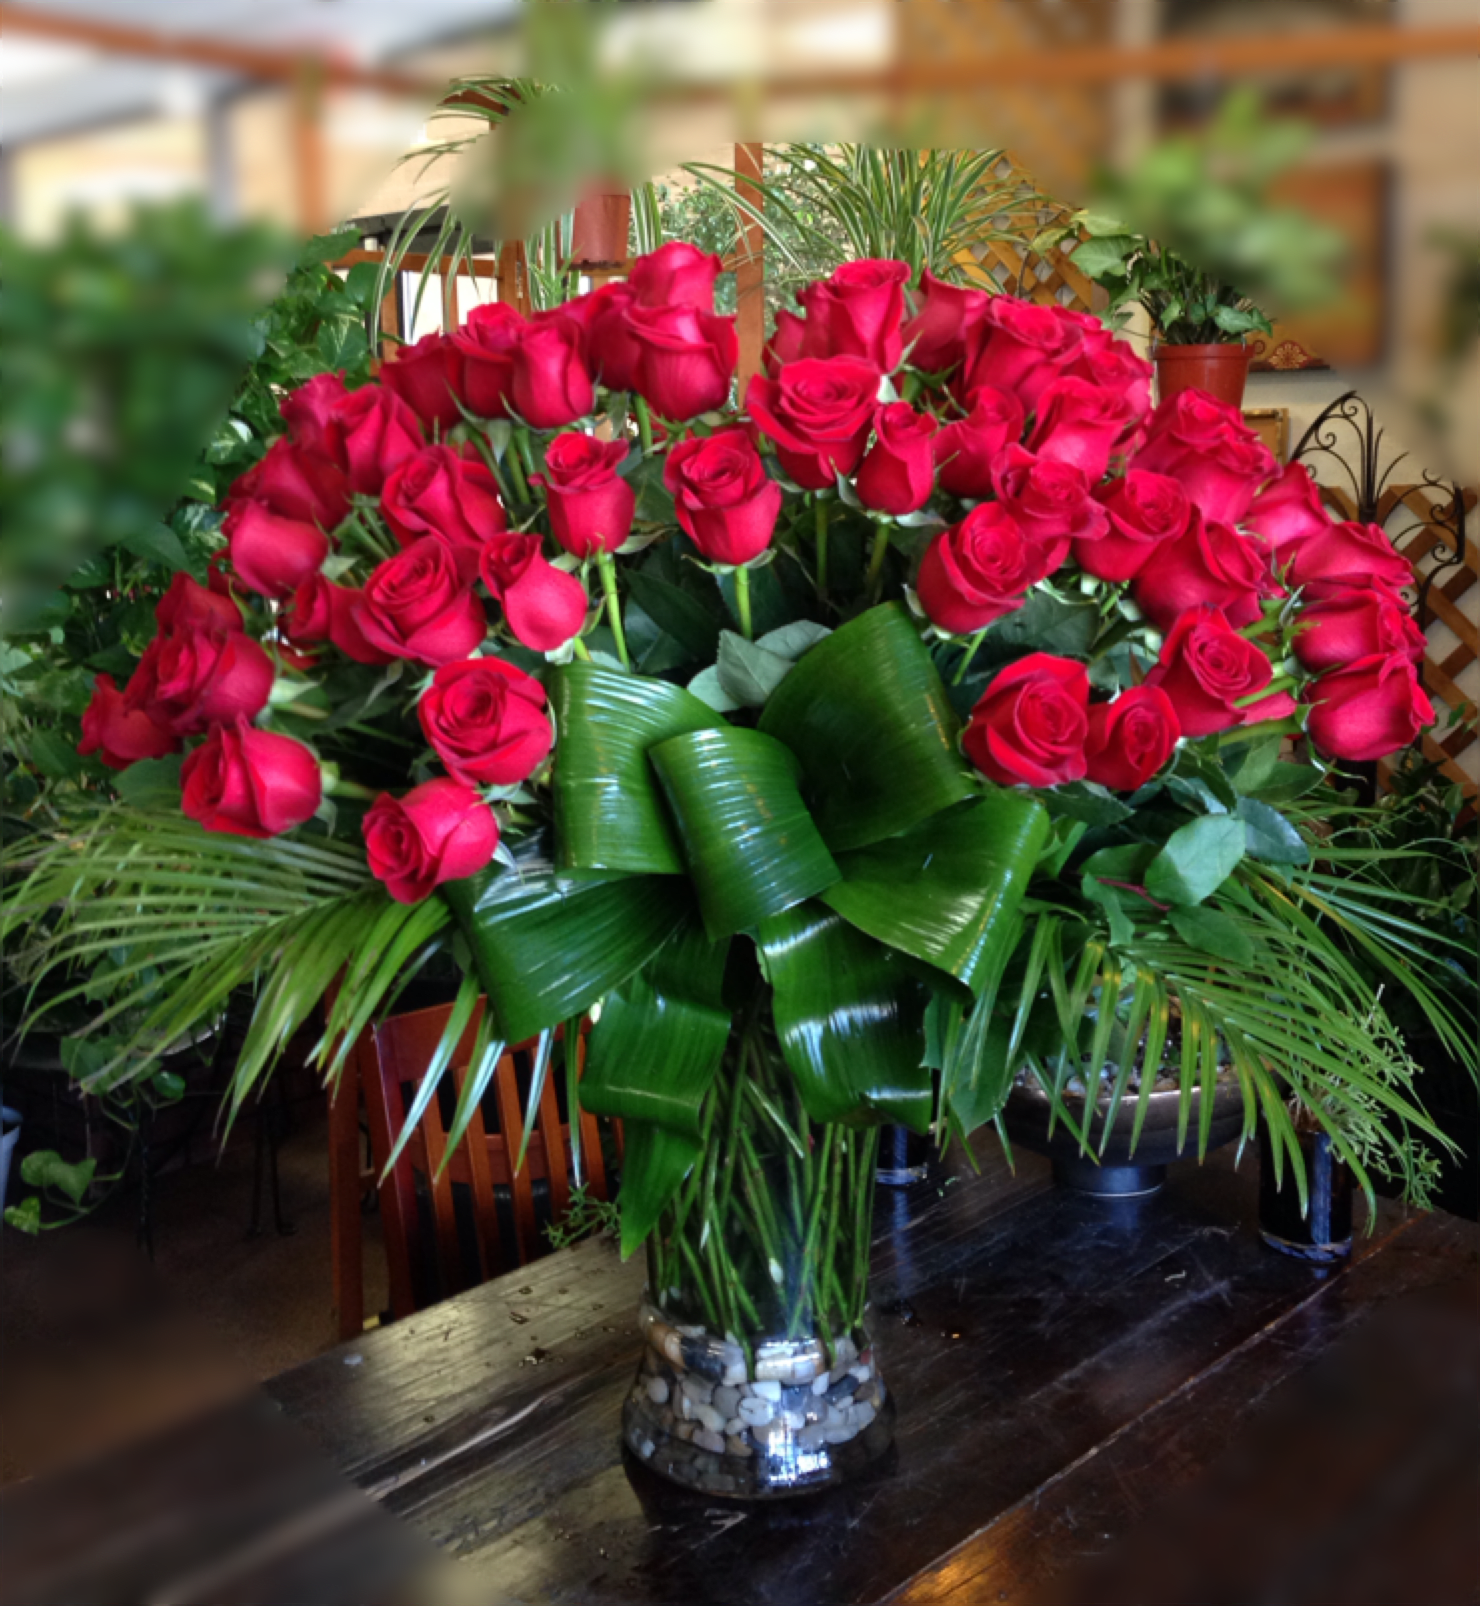 101 Roses to say I LOVE YOU! SPECIAL - 101 Premium red roses designed in a tall clear glass cylinder vase.